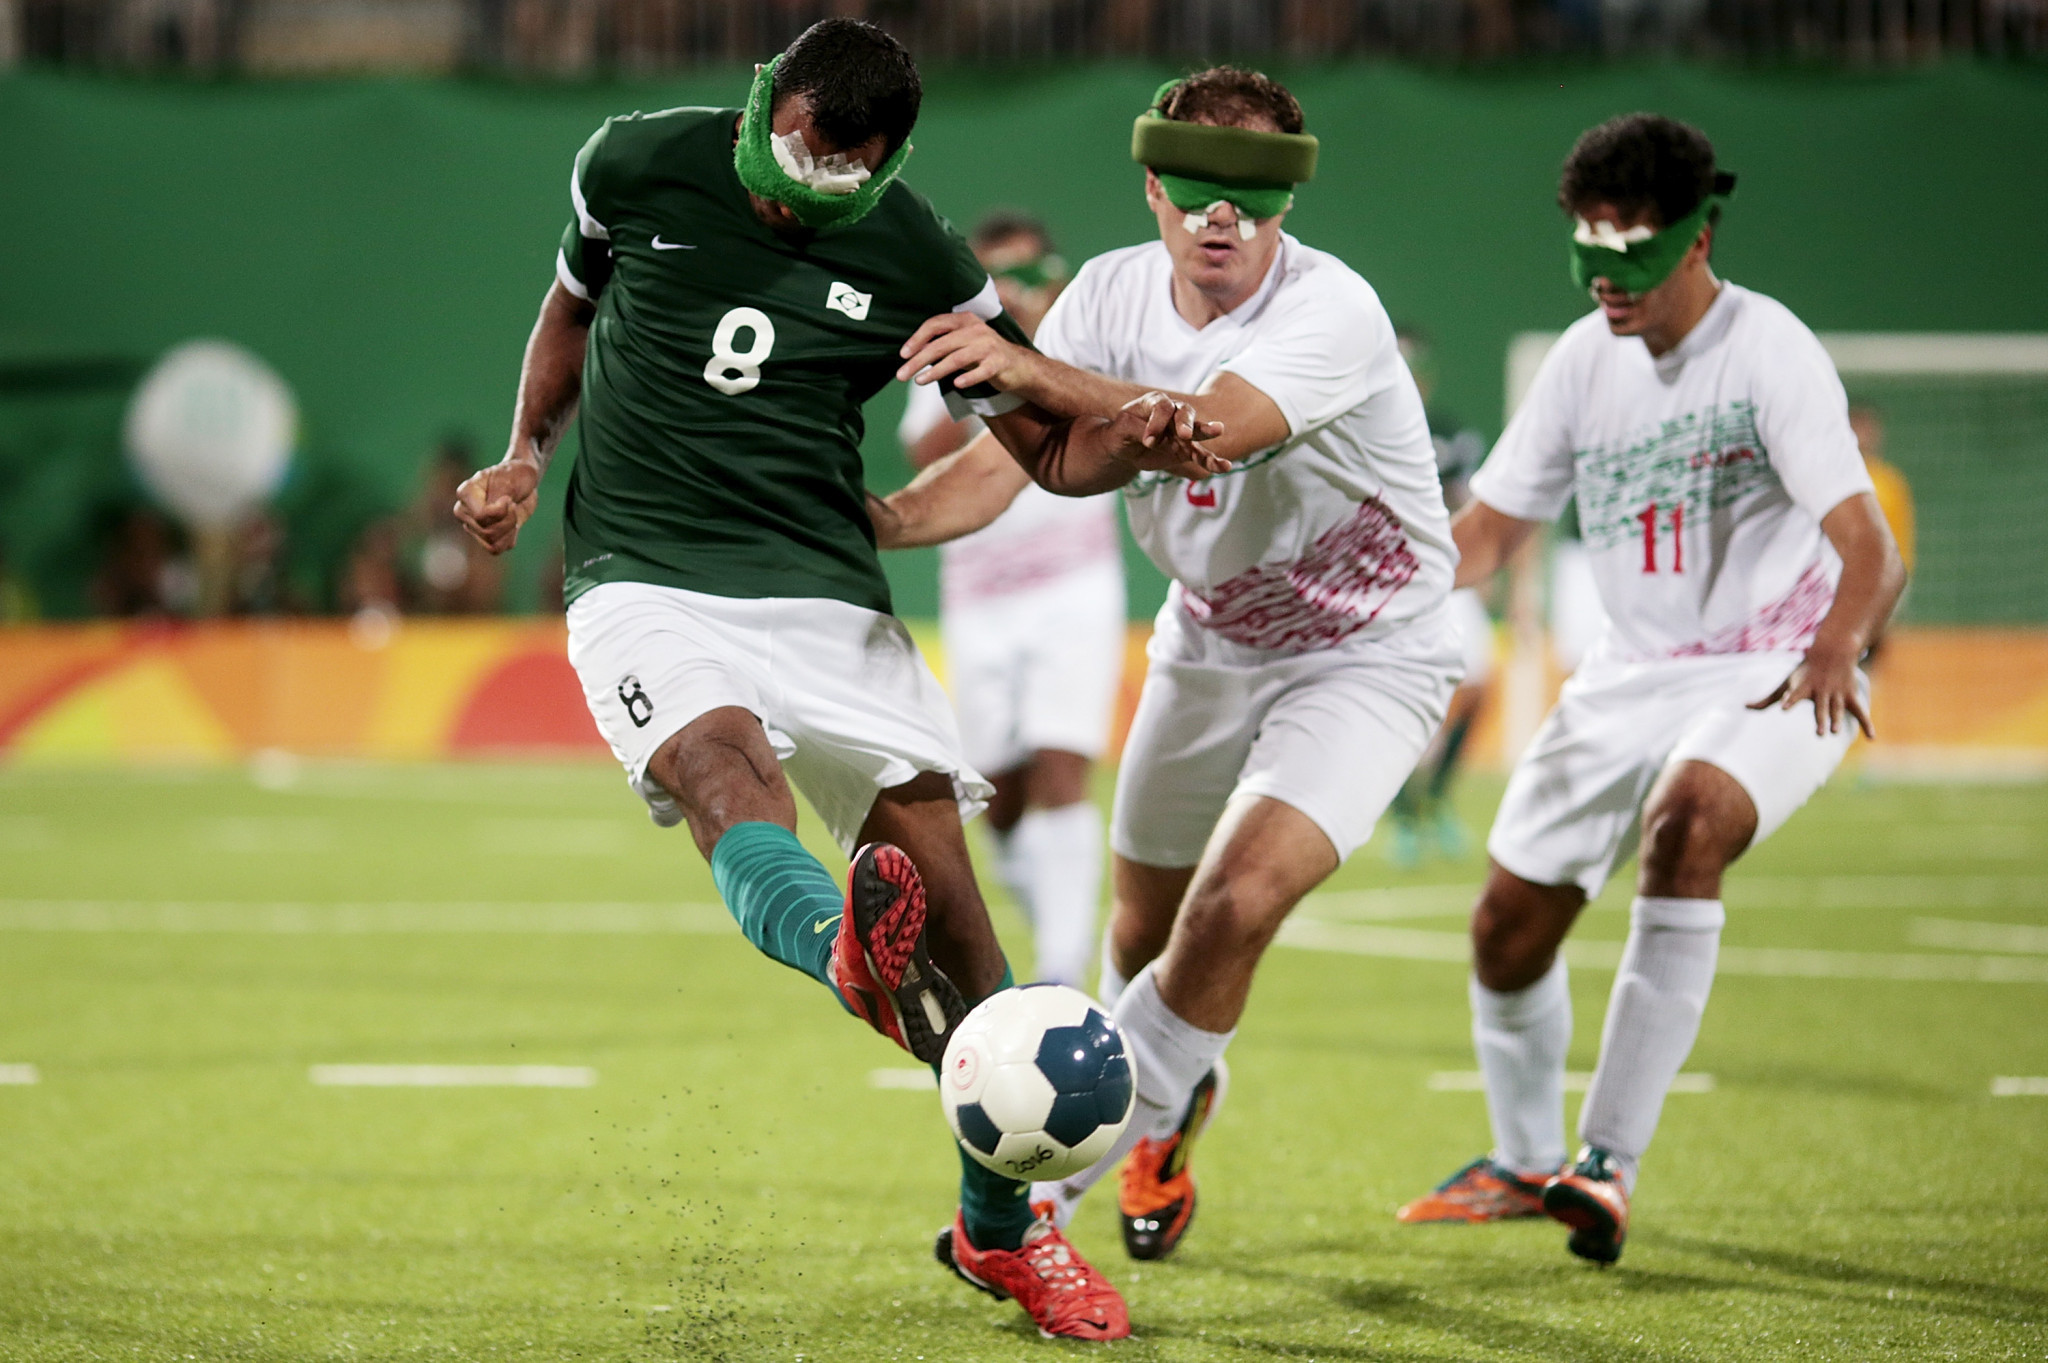 IBSA Football approves new concussion policy ahead of Tokyo 2020 Paralympics